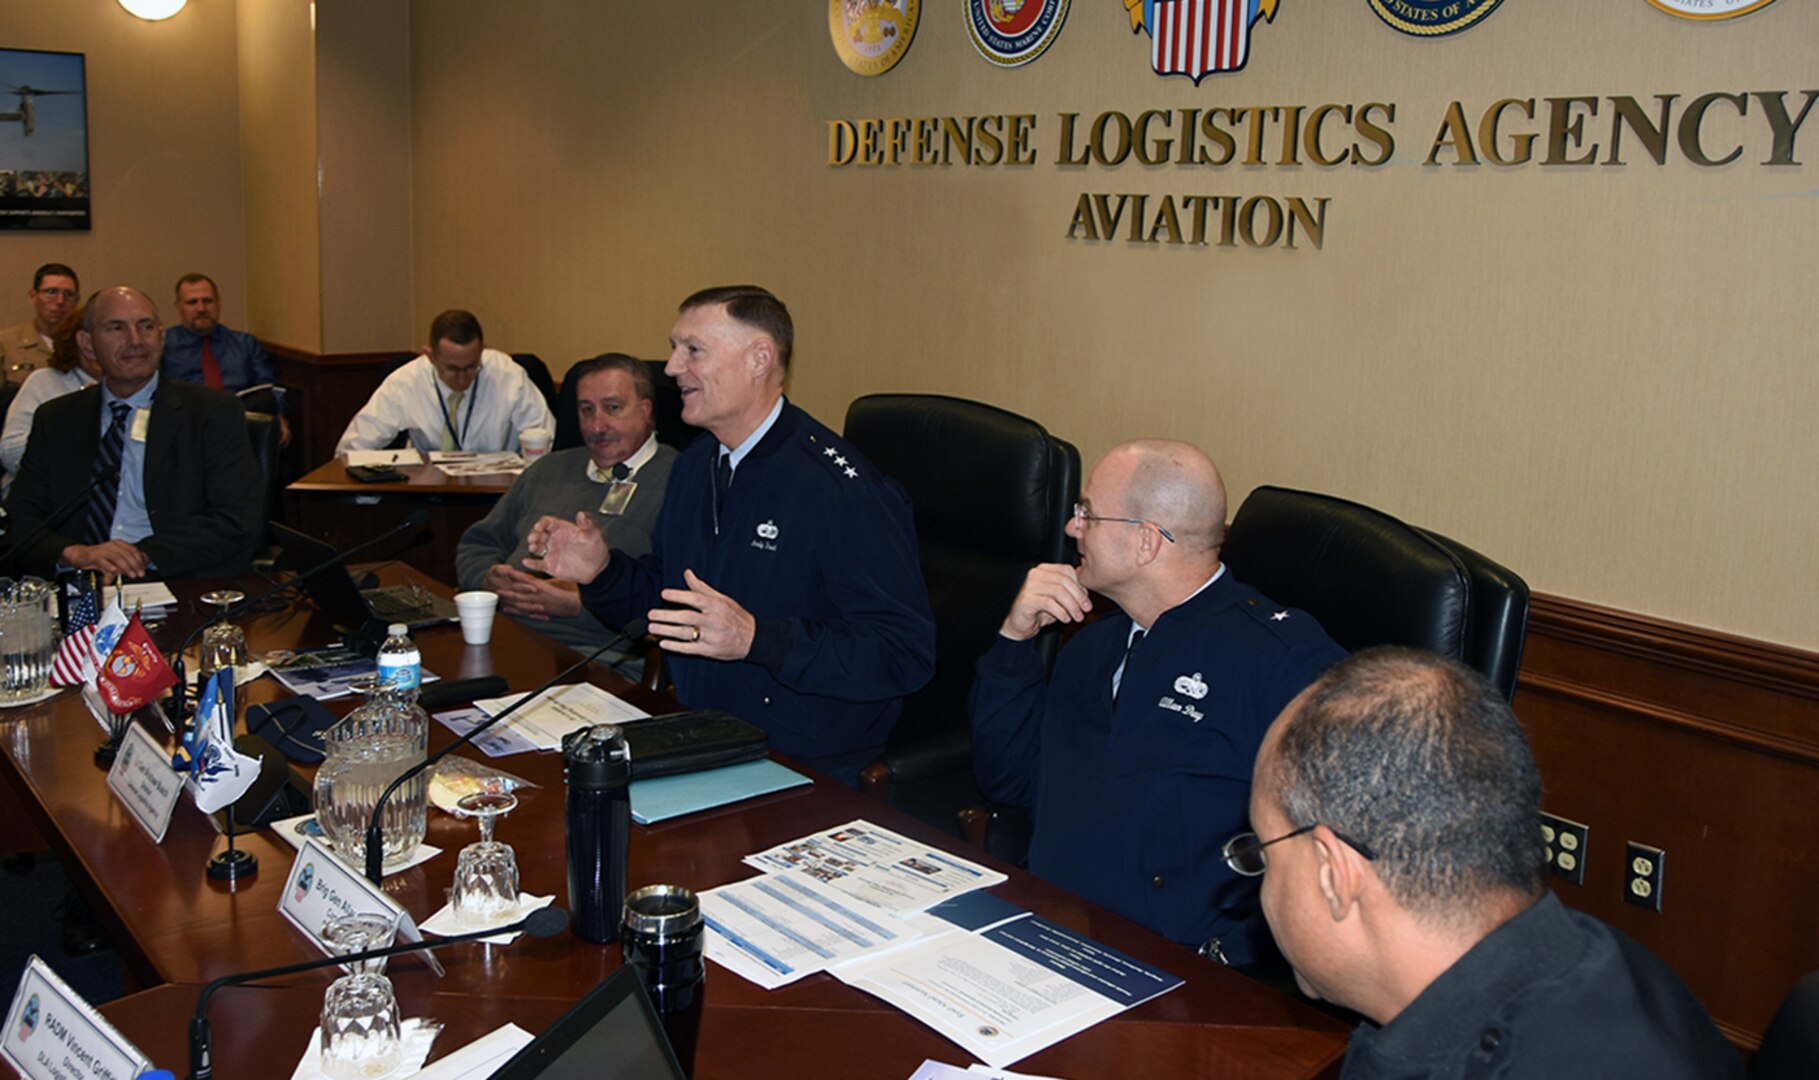 Defense Logistics Agency Director Air Force Lt. Gen. Andy Busch leads a discussion during his fiscal 2016 Annual Operating Plan review held at DLA Aviation in Richmond, Virginia, Feb. 5, 2016.